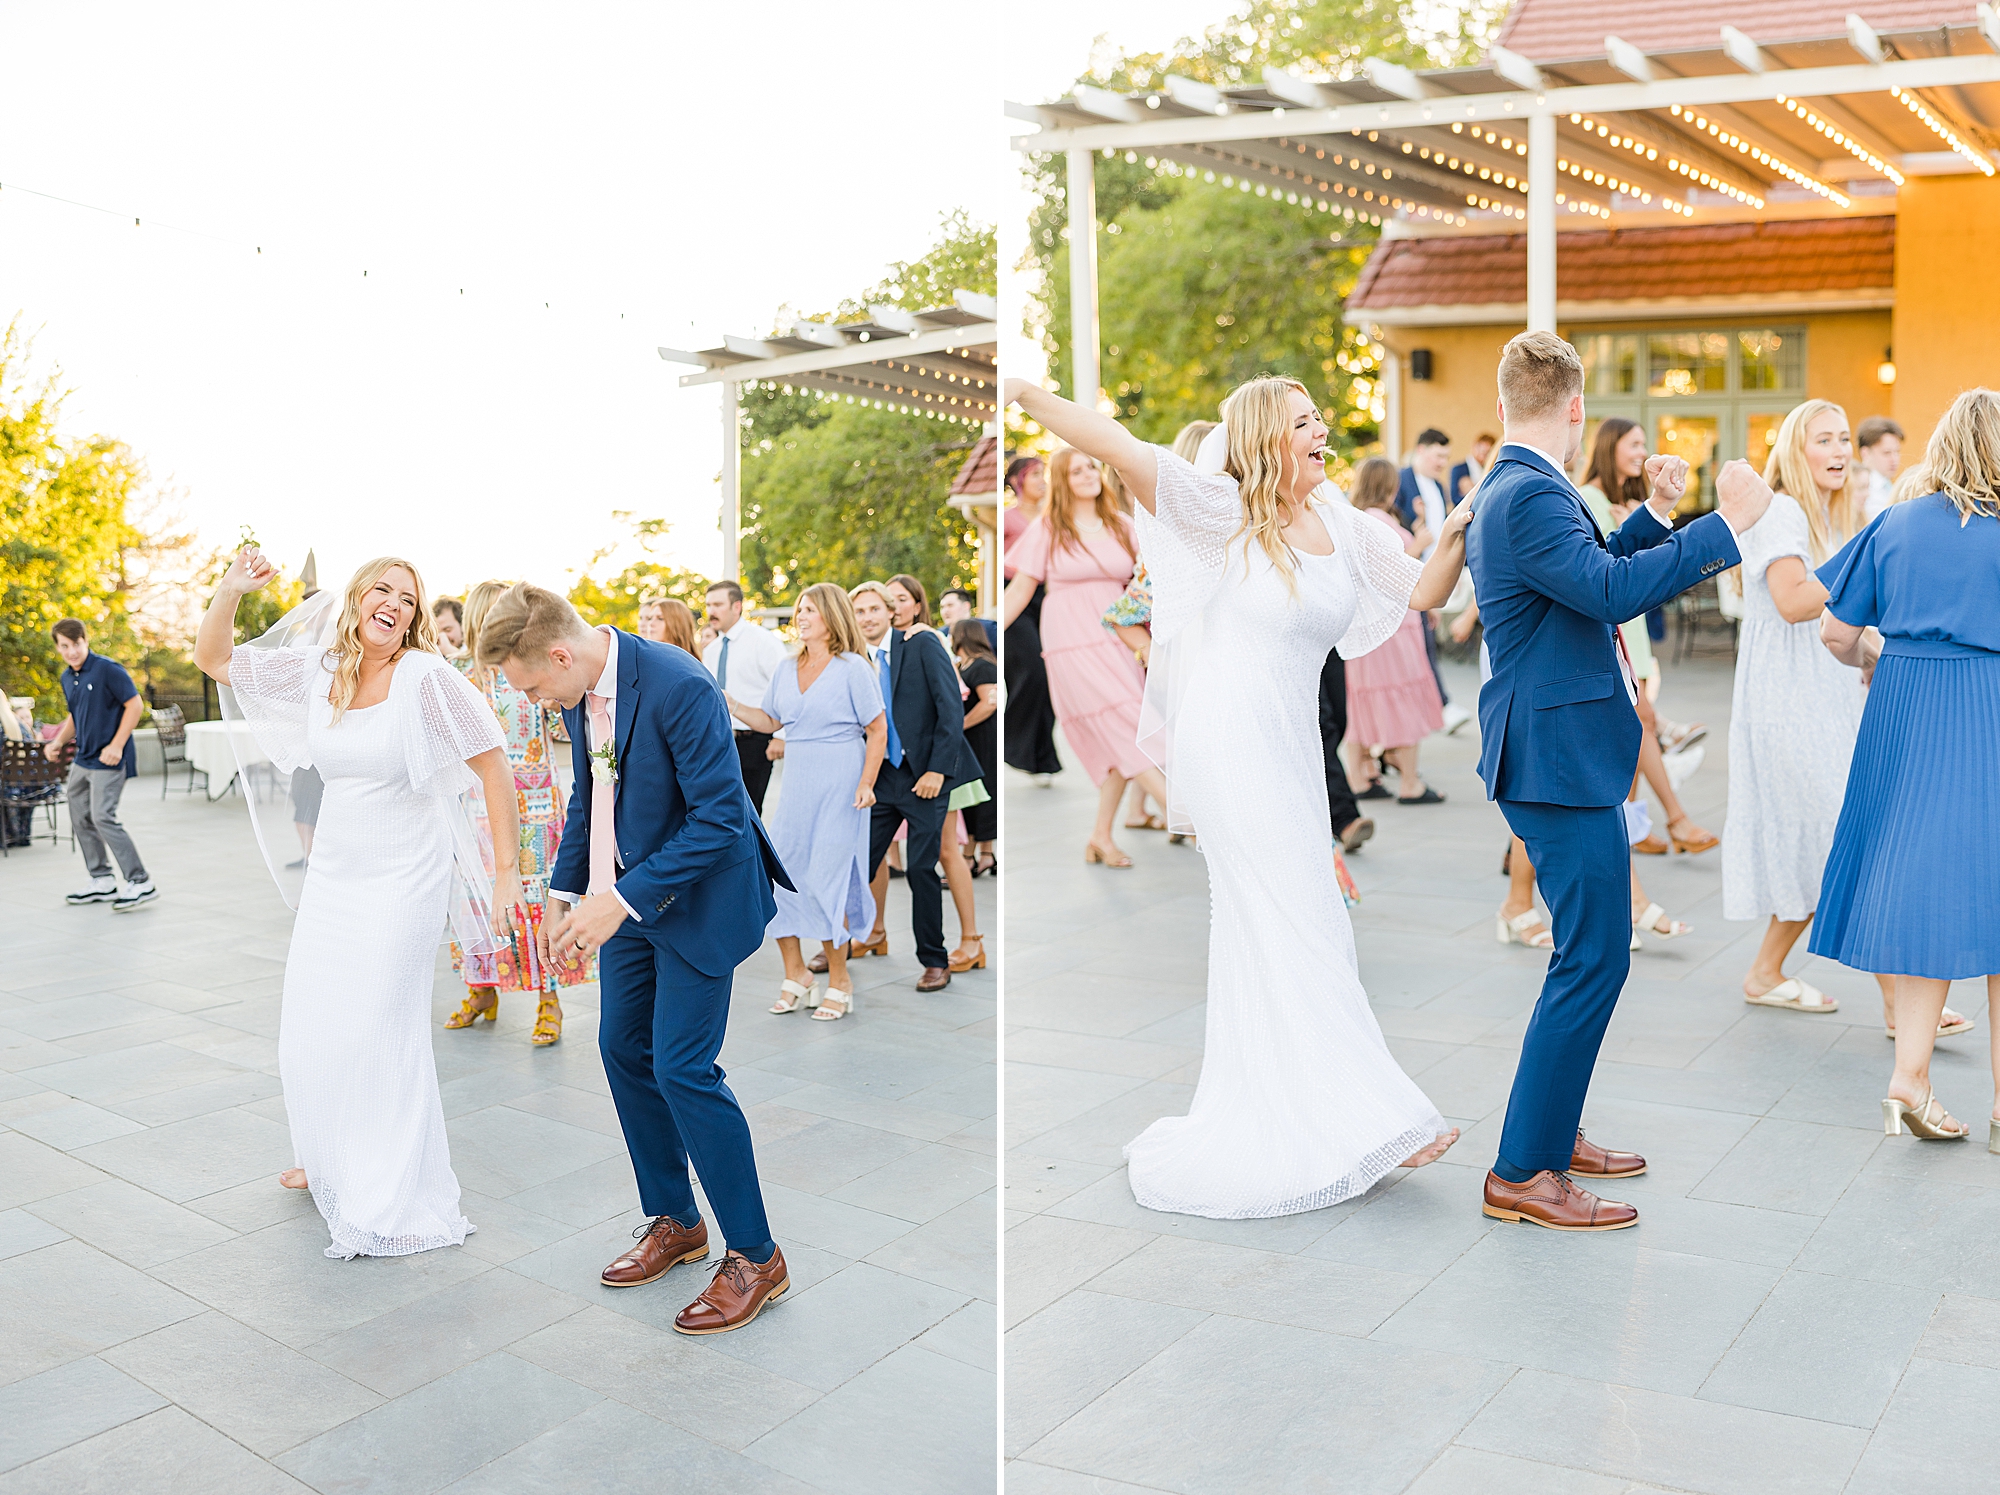 The couple's laughter fills the air as they dance with friends and family during the reception.
